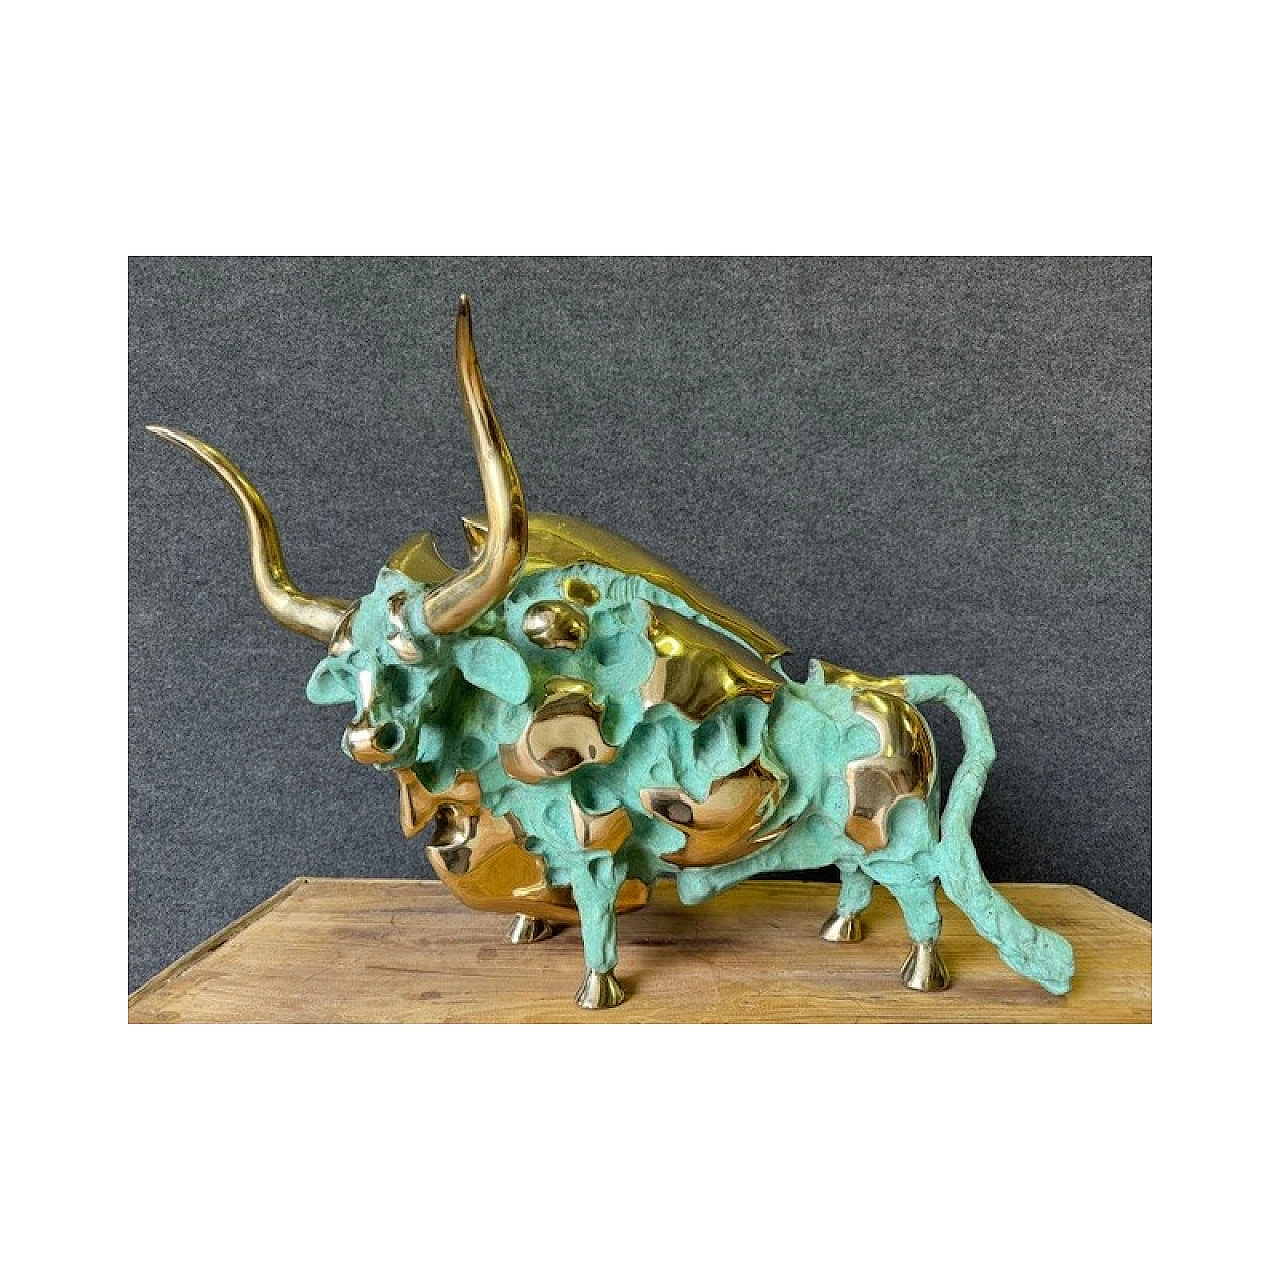 Oxidized and polished bronze bull sculpture 8